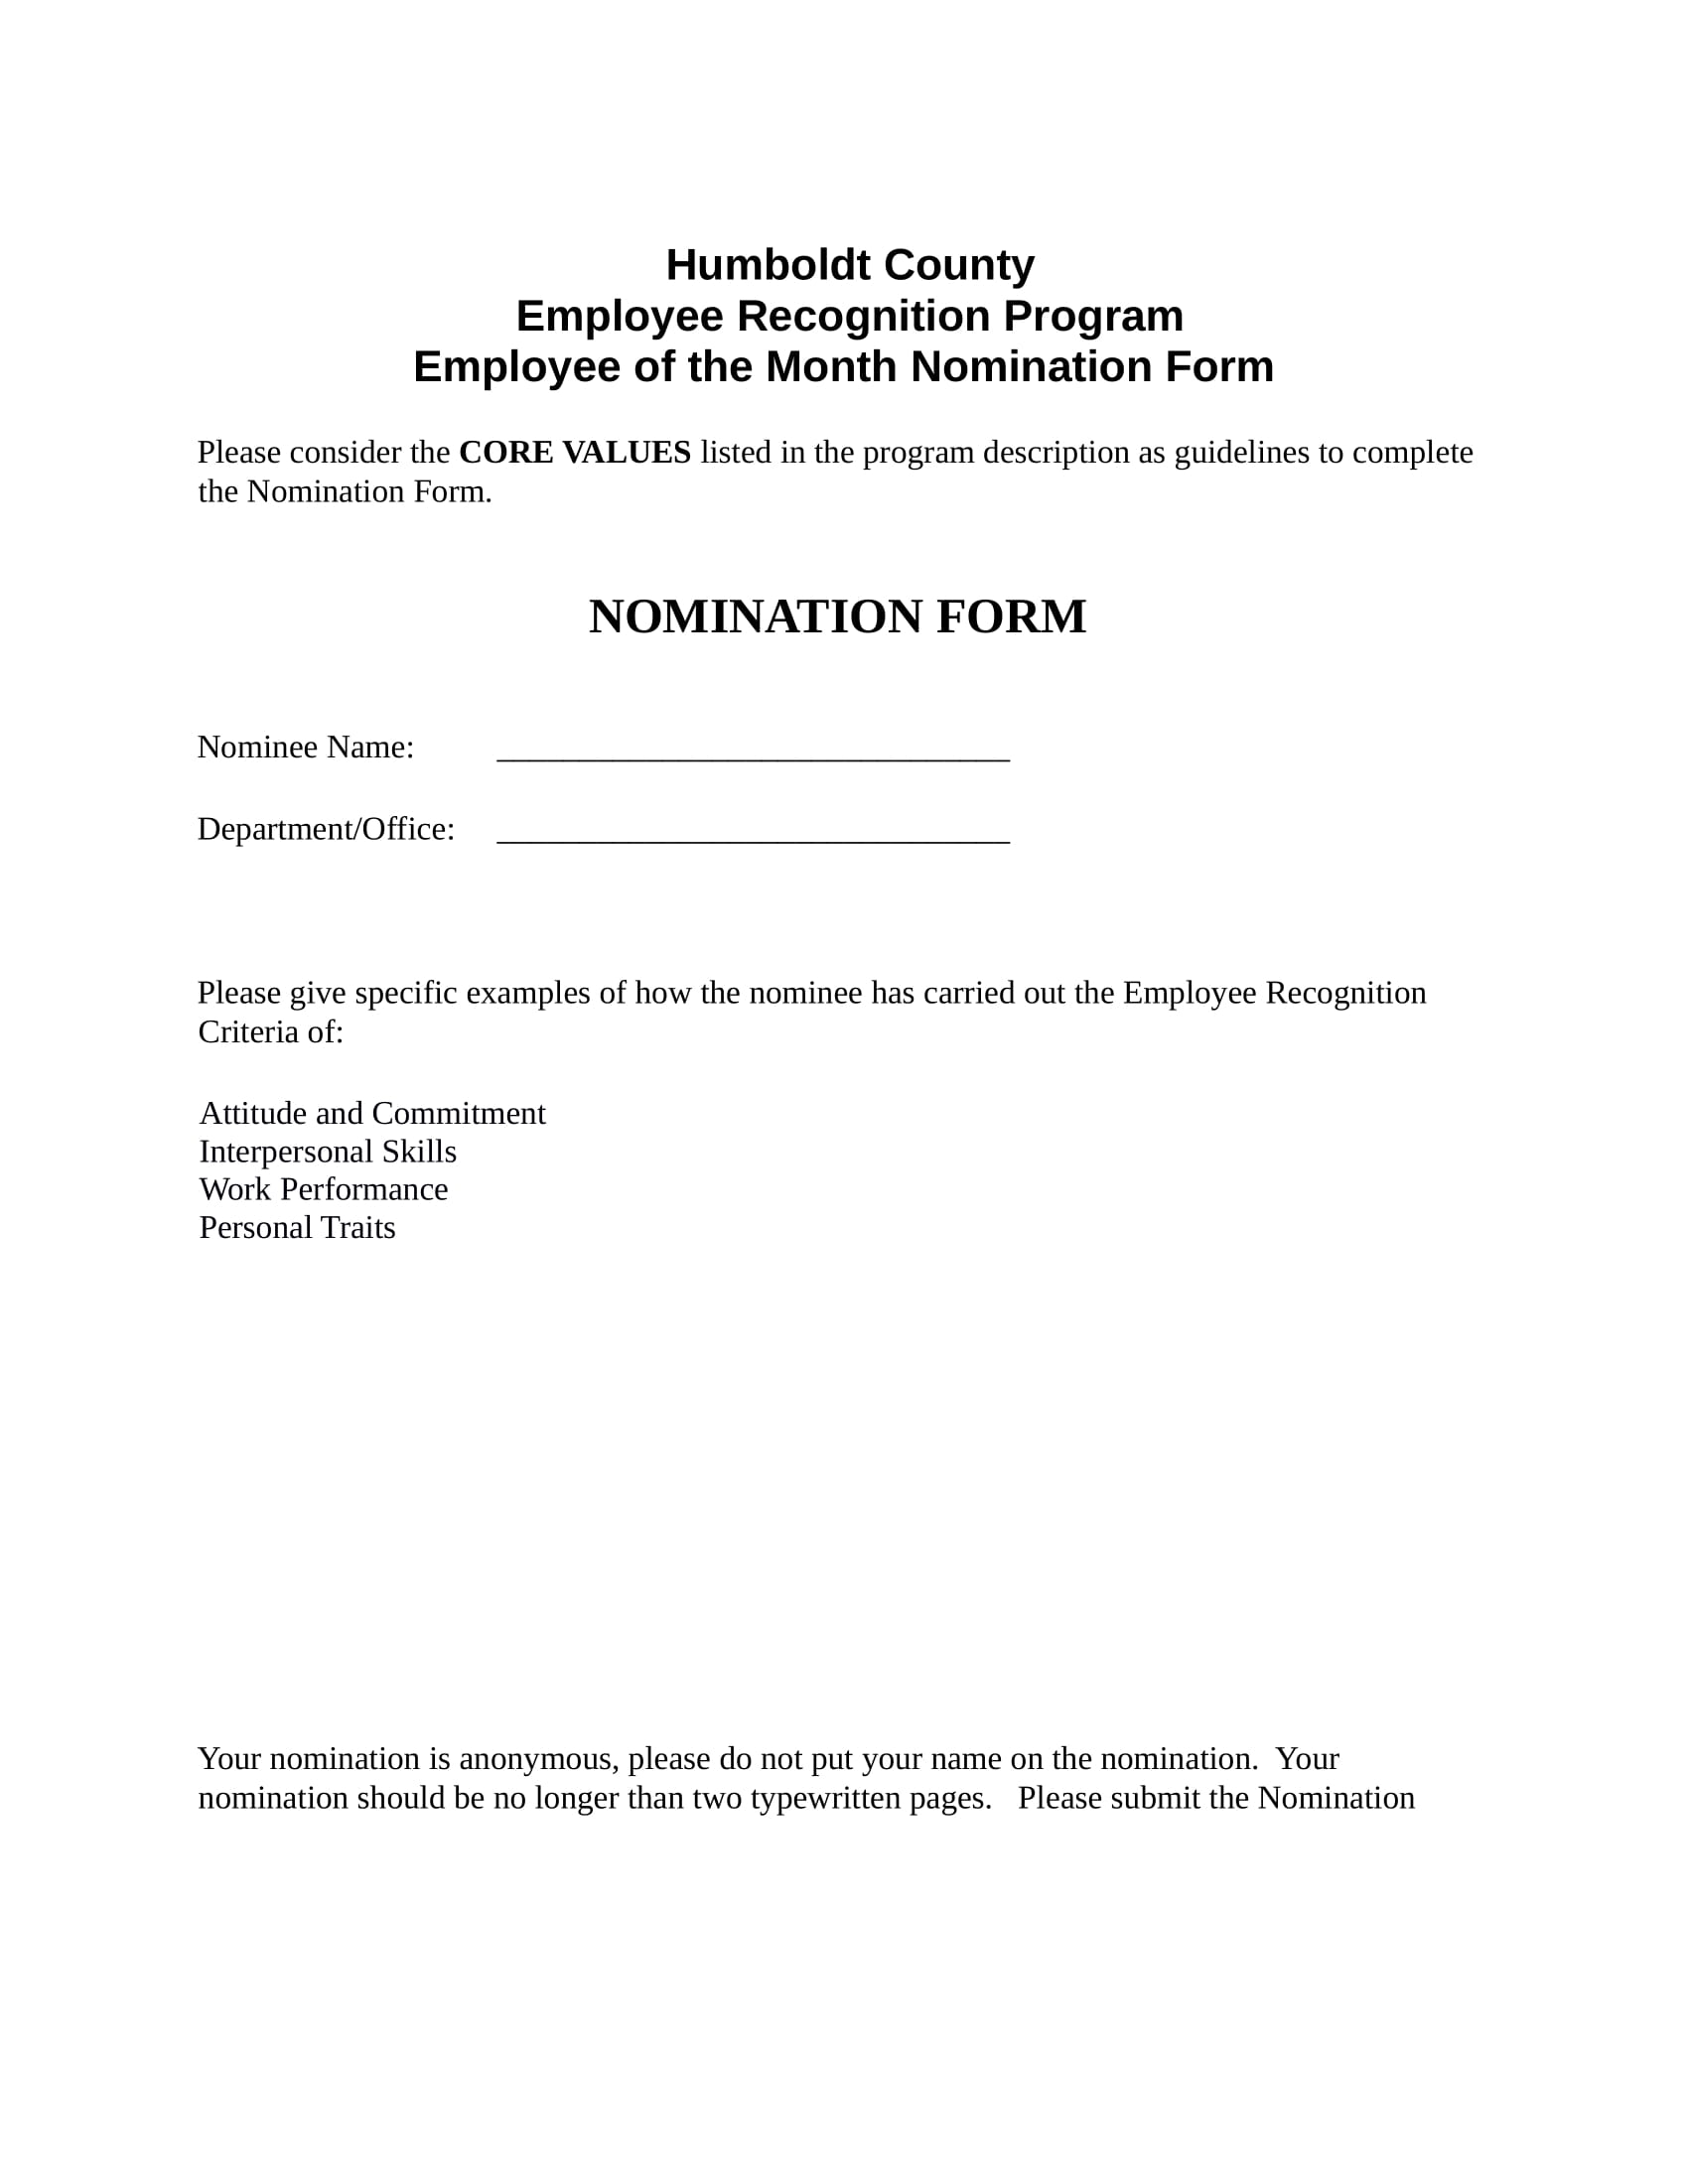 employee of the month nomination form in doc 1